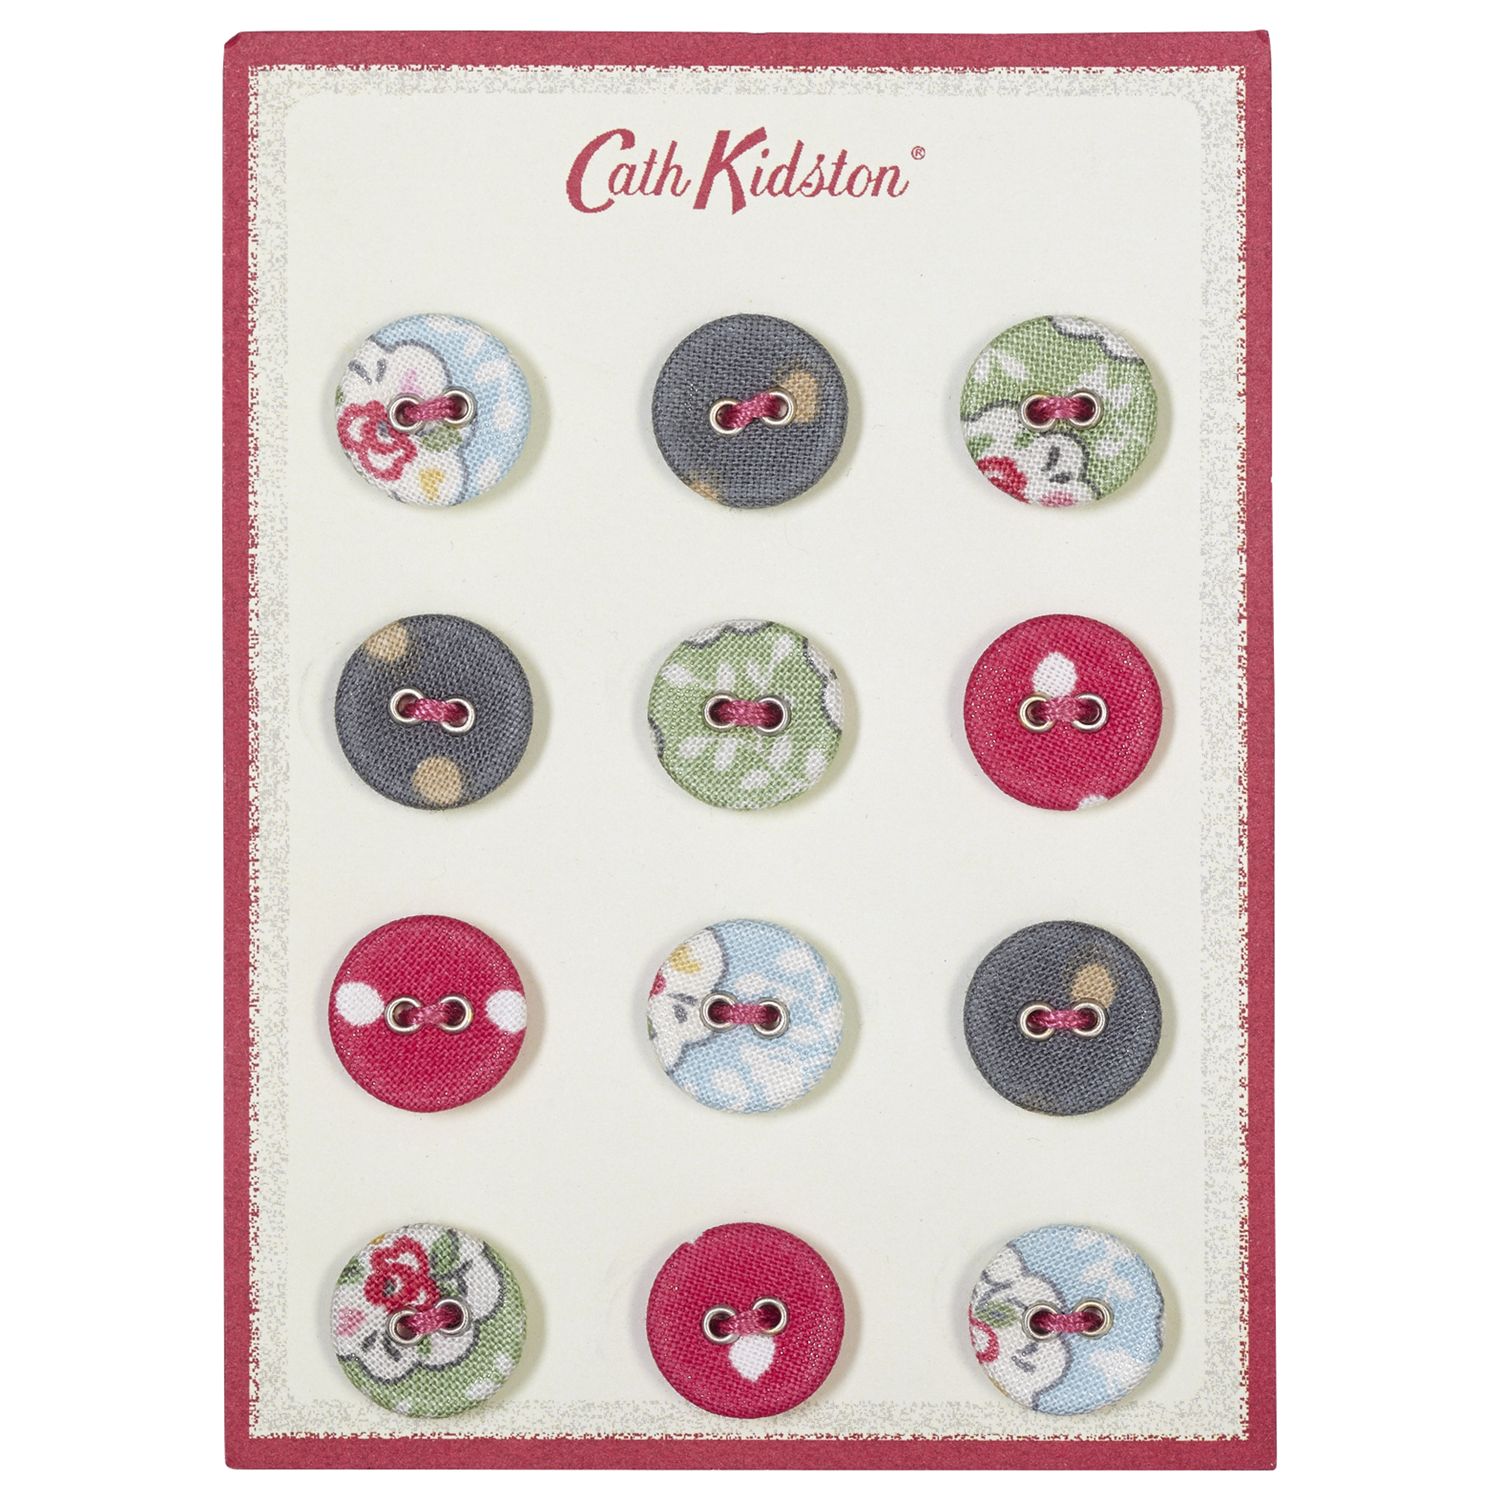 cath kidston buttons